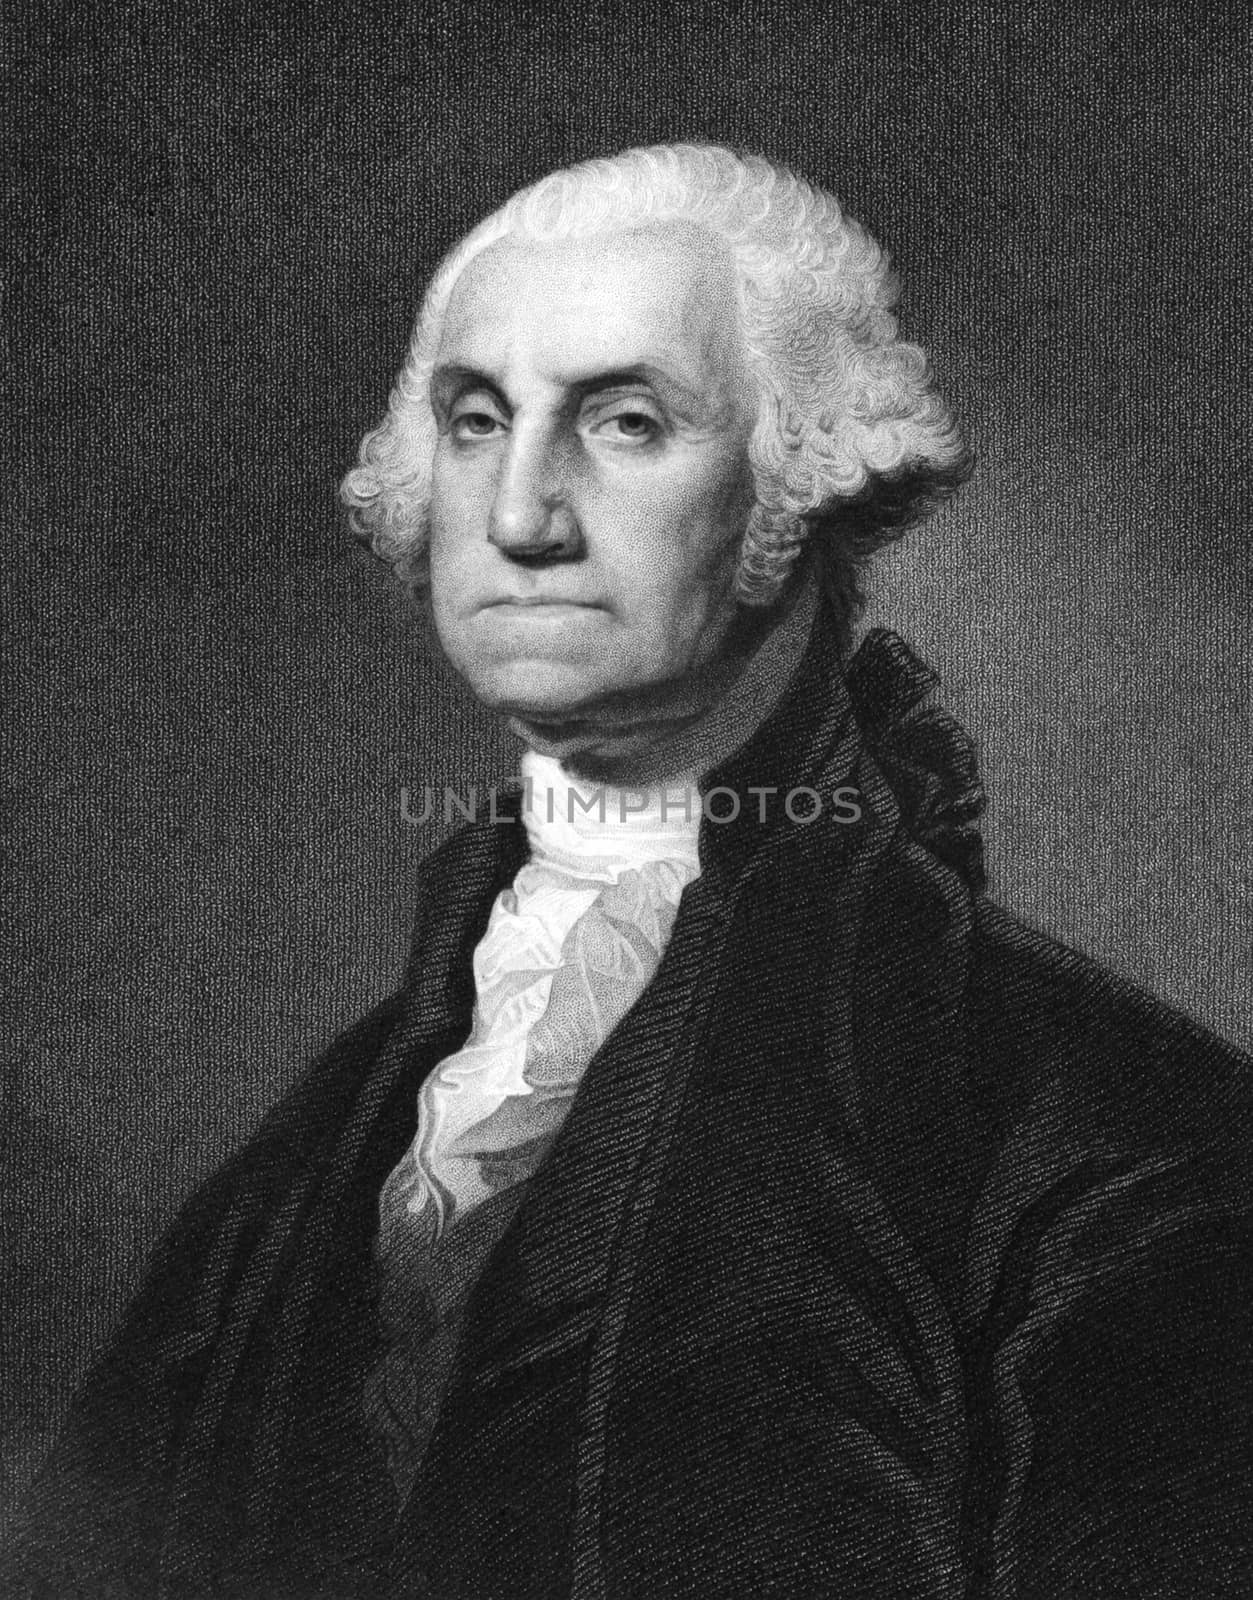 George Washington (1731-1799) on engraving from 1873. First President of the U.S.A. during 1789-1797  and commander of the Continental Army in the American Revolutionary War during 1775-1783. Engraved by unknown artist and published in ''Portrait Gallery of Eminent Men and Women with Biographies'',USA,1873.